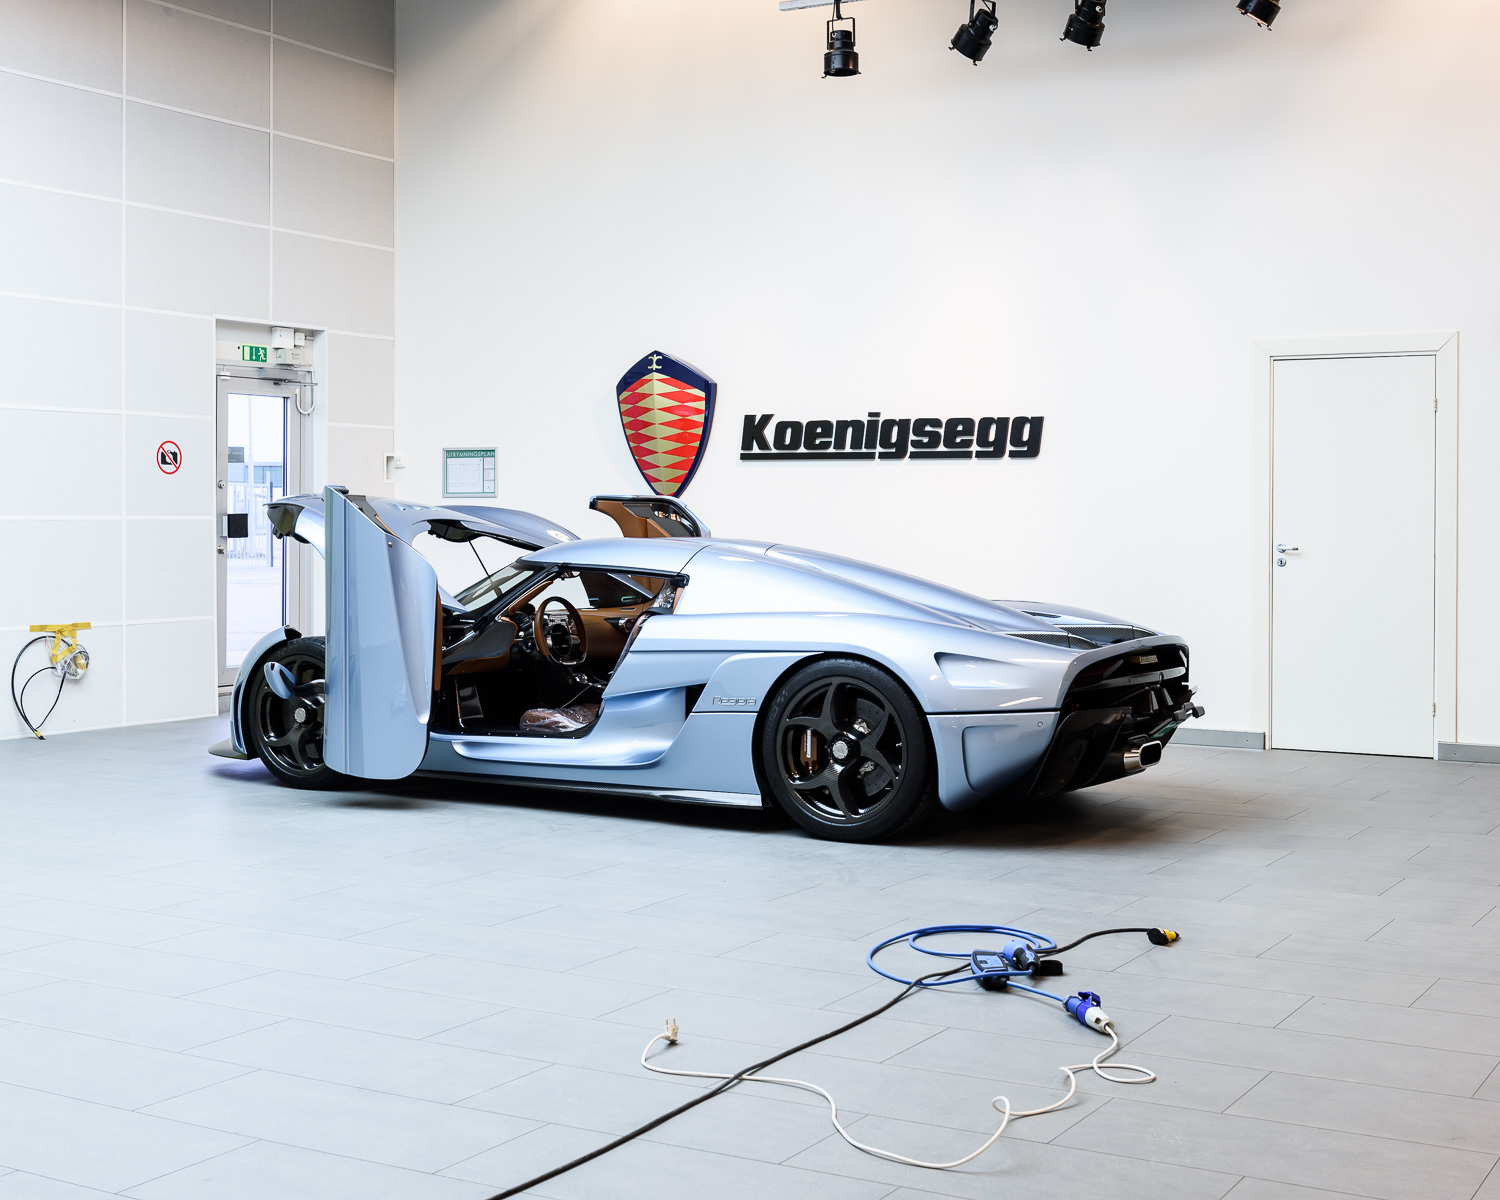  A Regera car ready to be tested. 